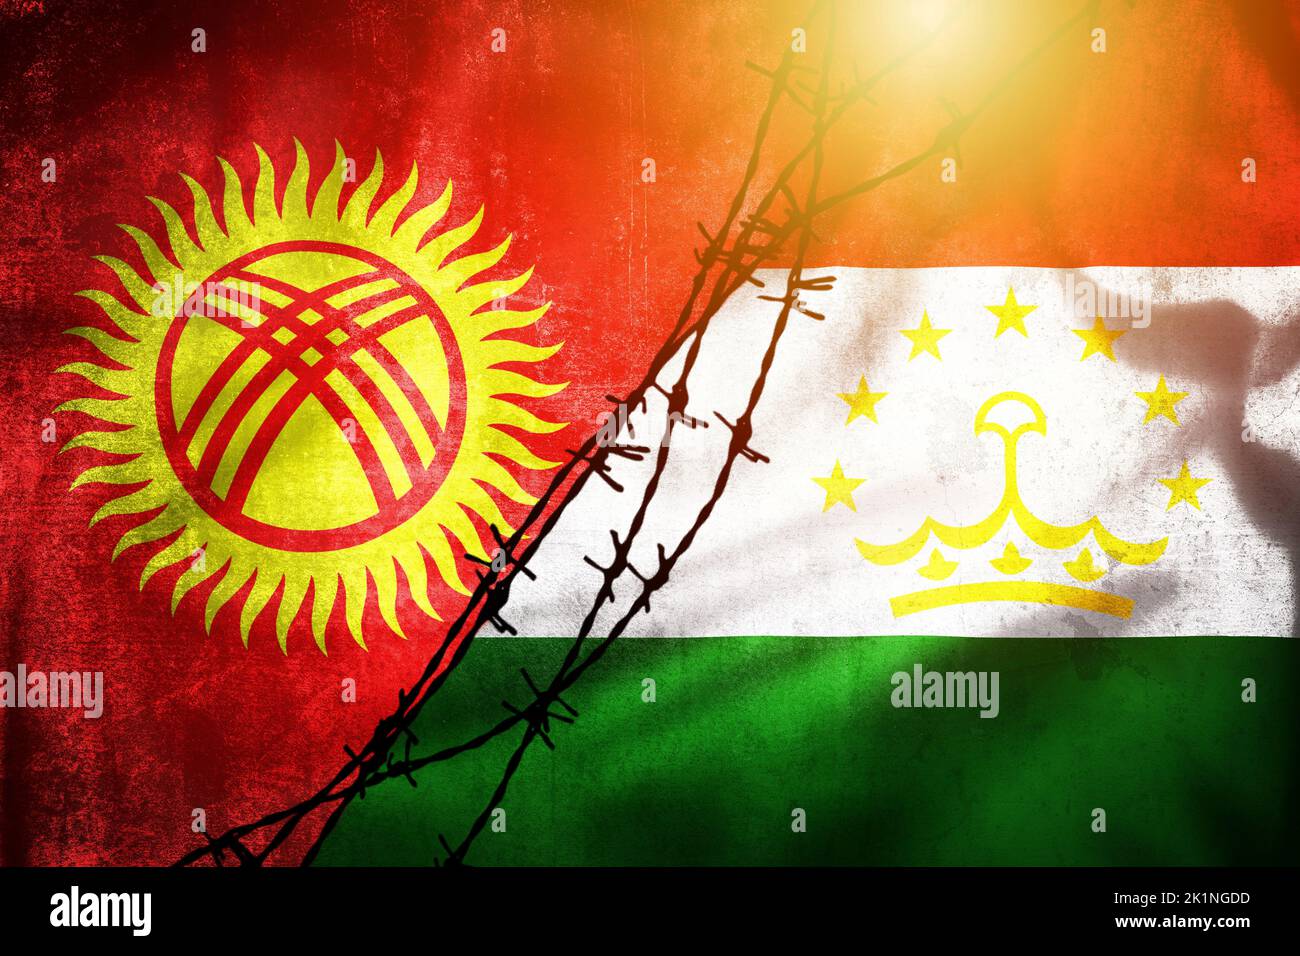 Grunge flags of Kyrgyzstan and Tajikistan divided by barb wire illustration sun haze view, concept of tense relations between two countries Stock Photo